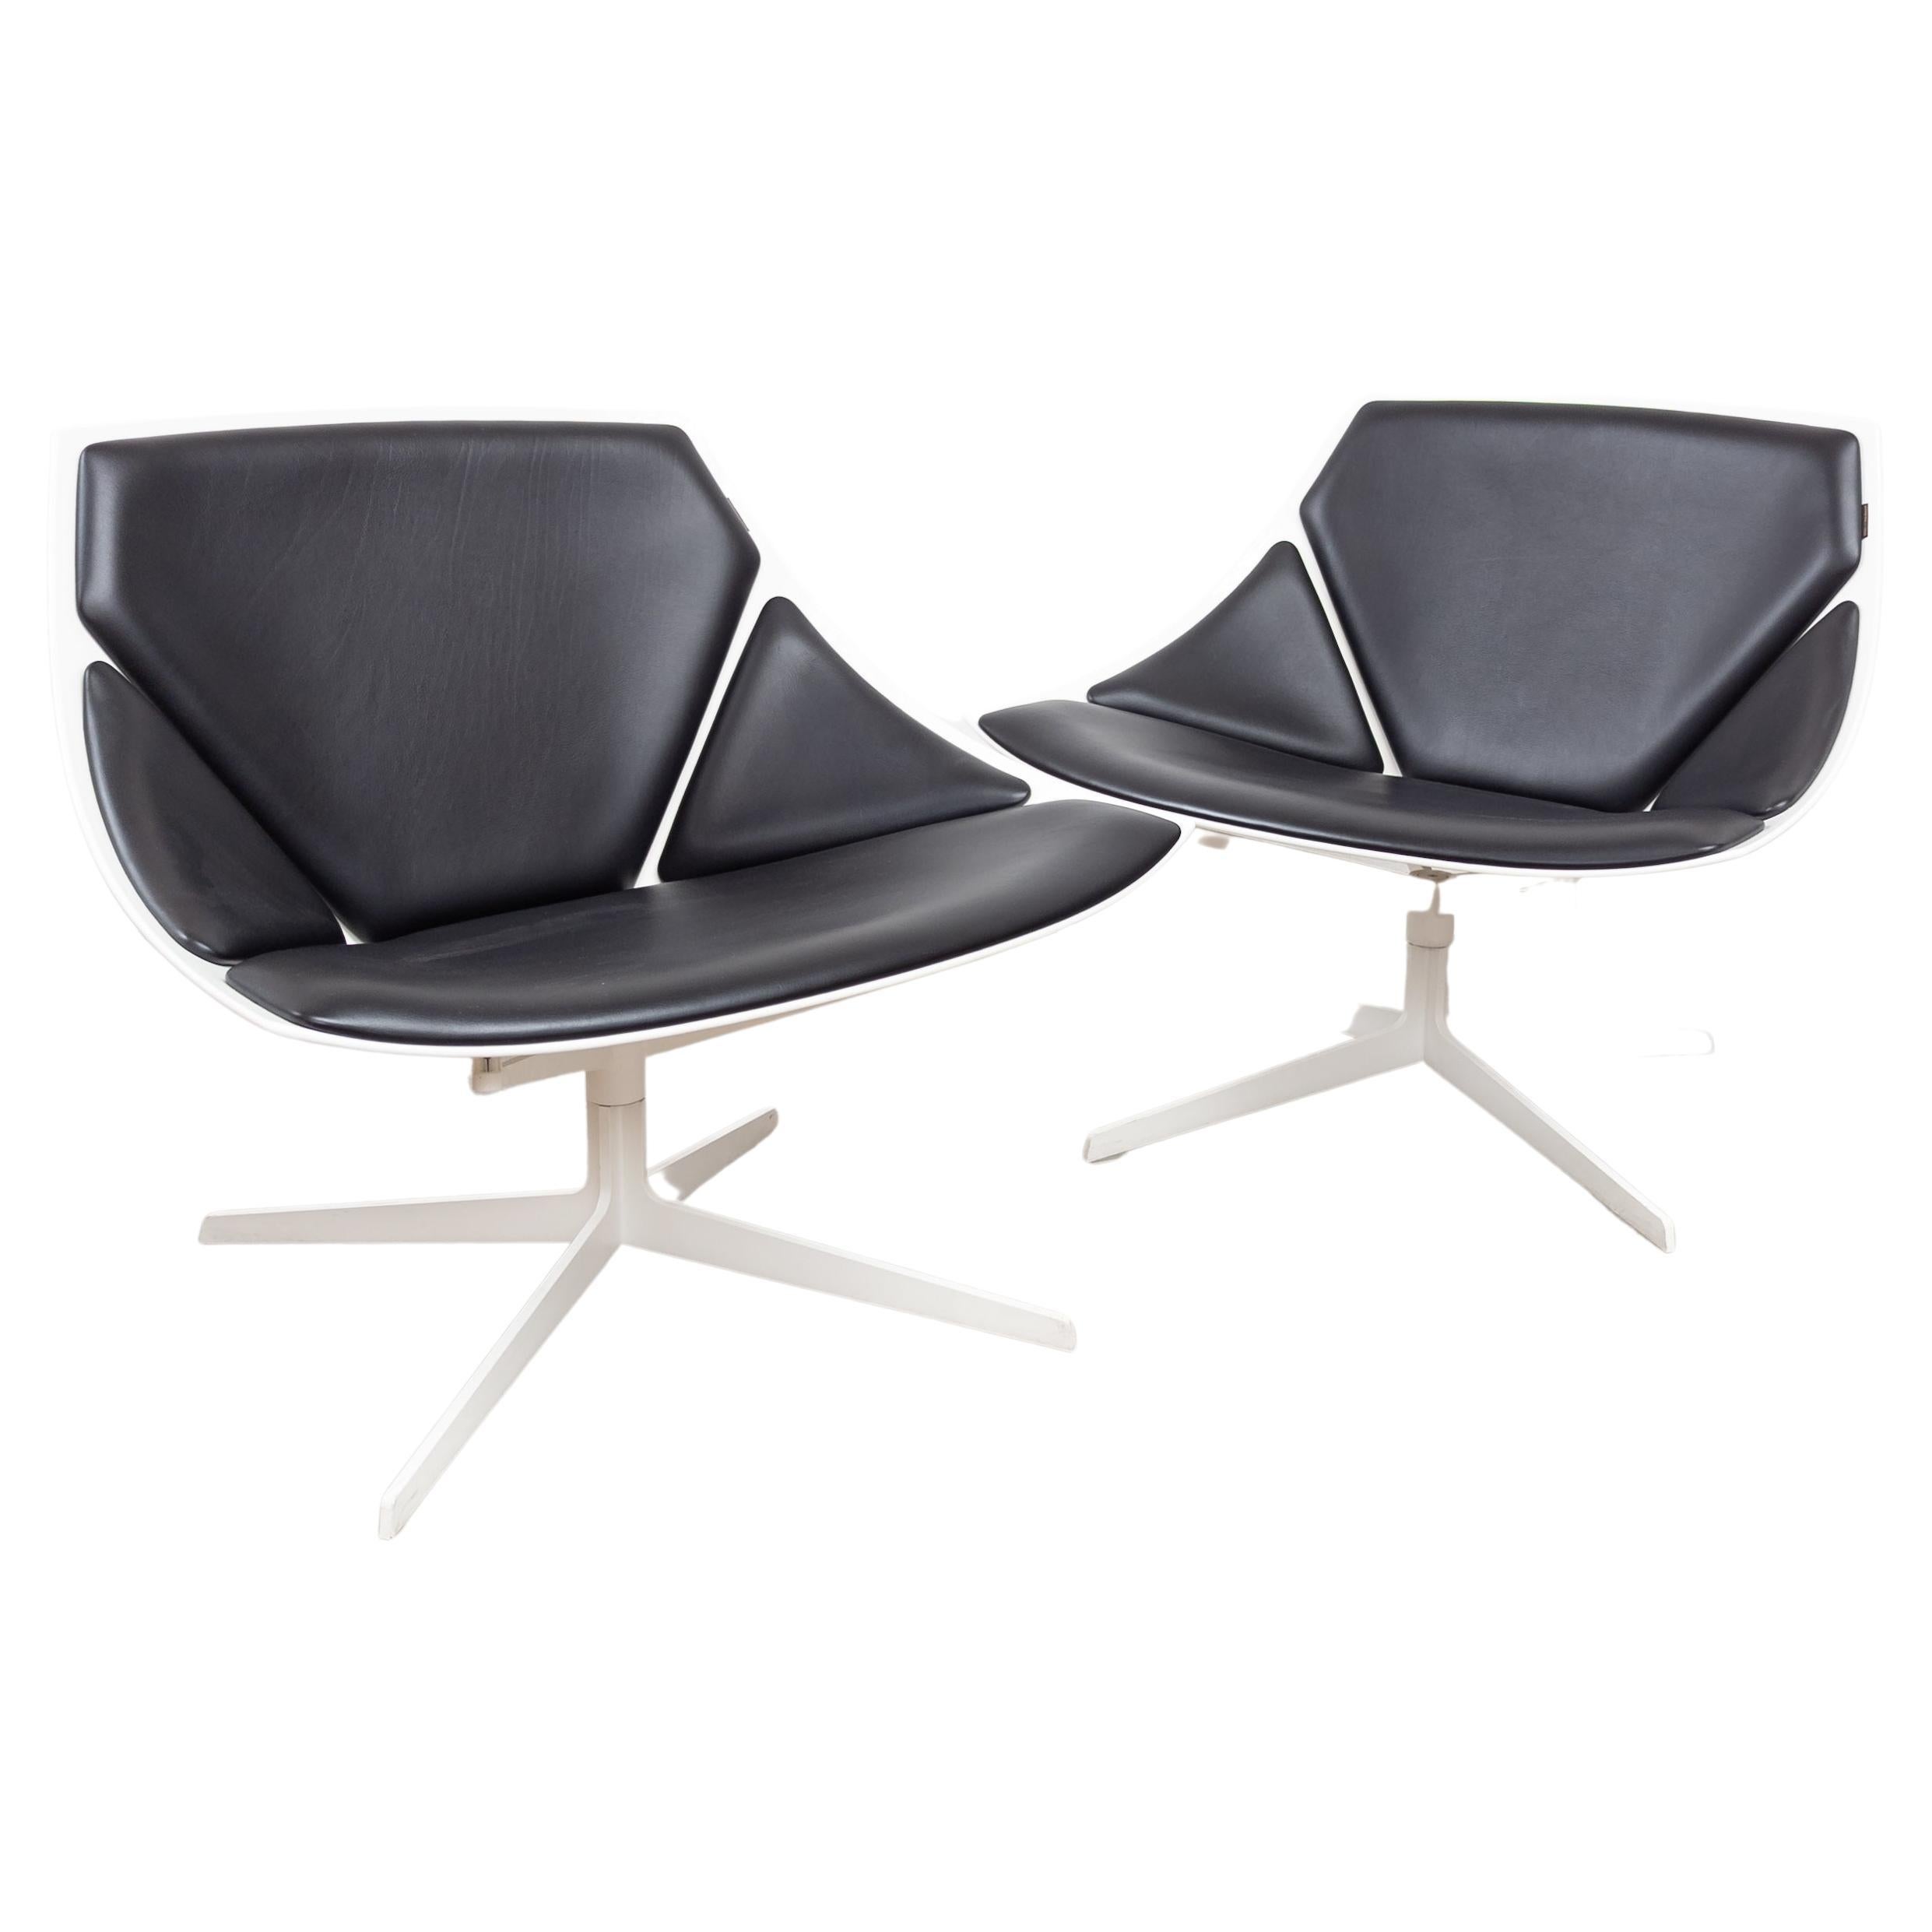 Pair of JL10 'Space' Chairs by Jjurgen Laub and Markus Jehs for Fritz Hansen  For Sale at 1stDibs